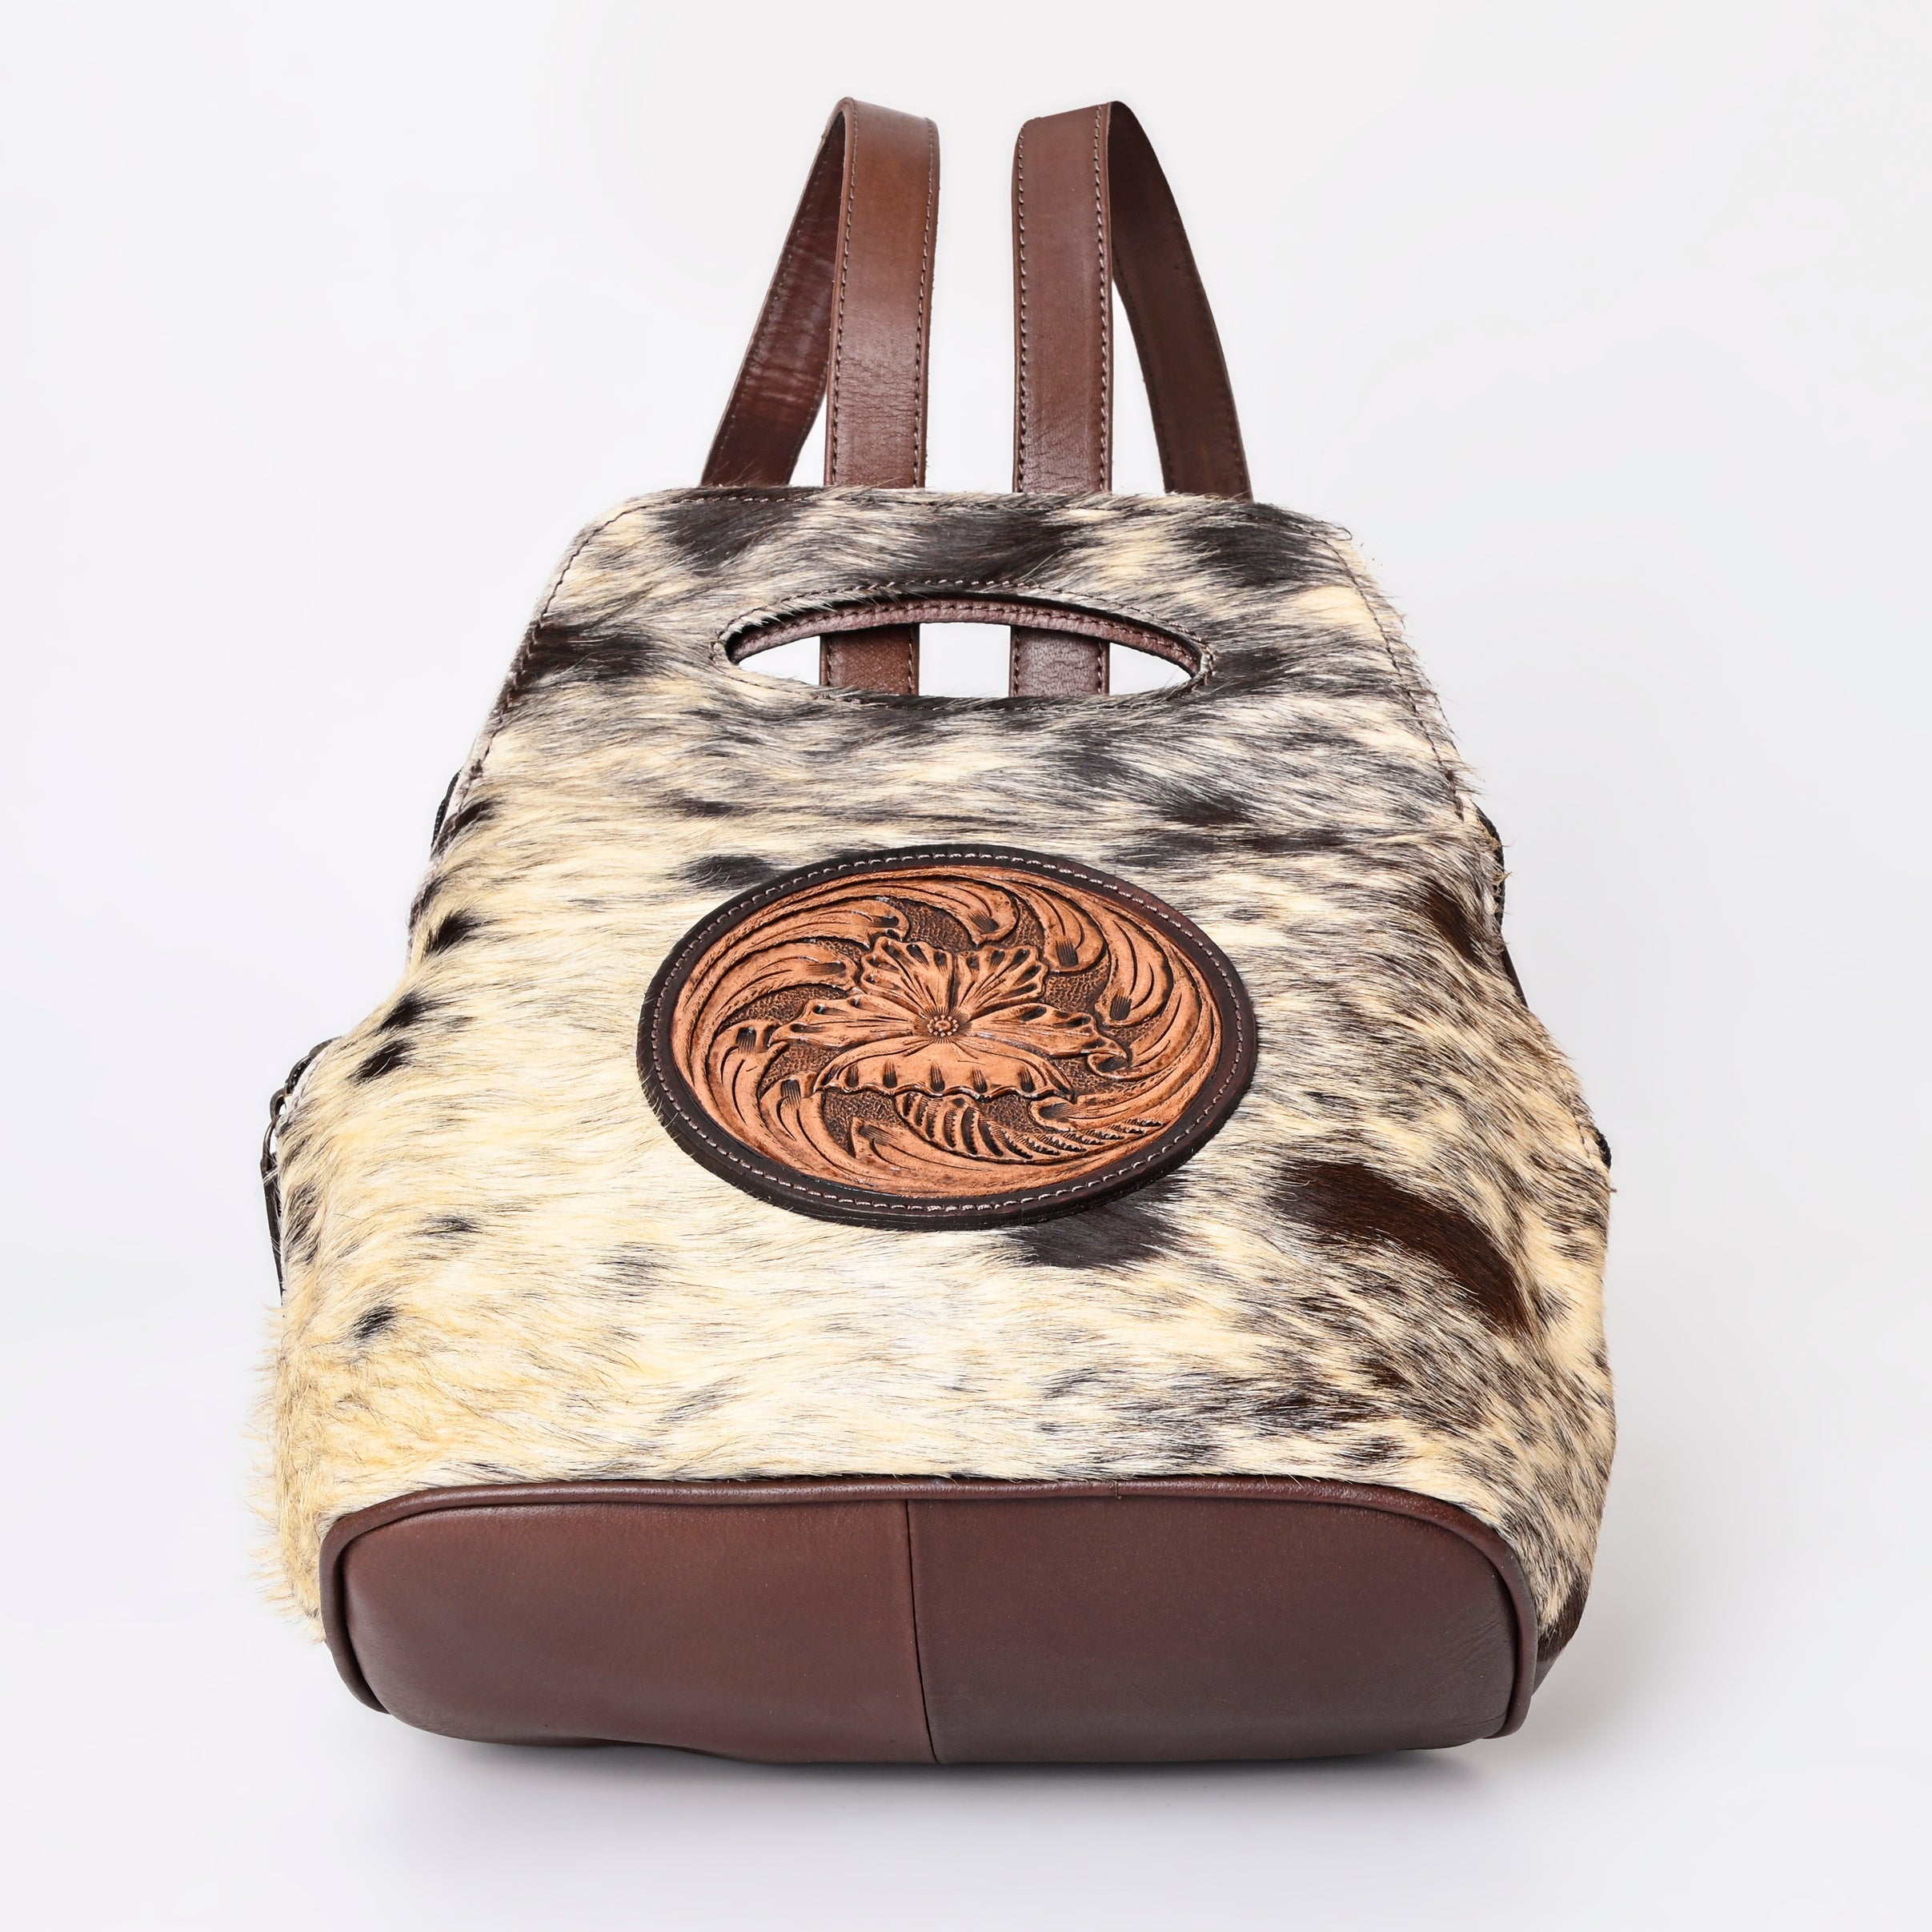 Montana West 100% Genuine Hair-On Cowhide Leather Backpack - Cowgirl Wear